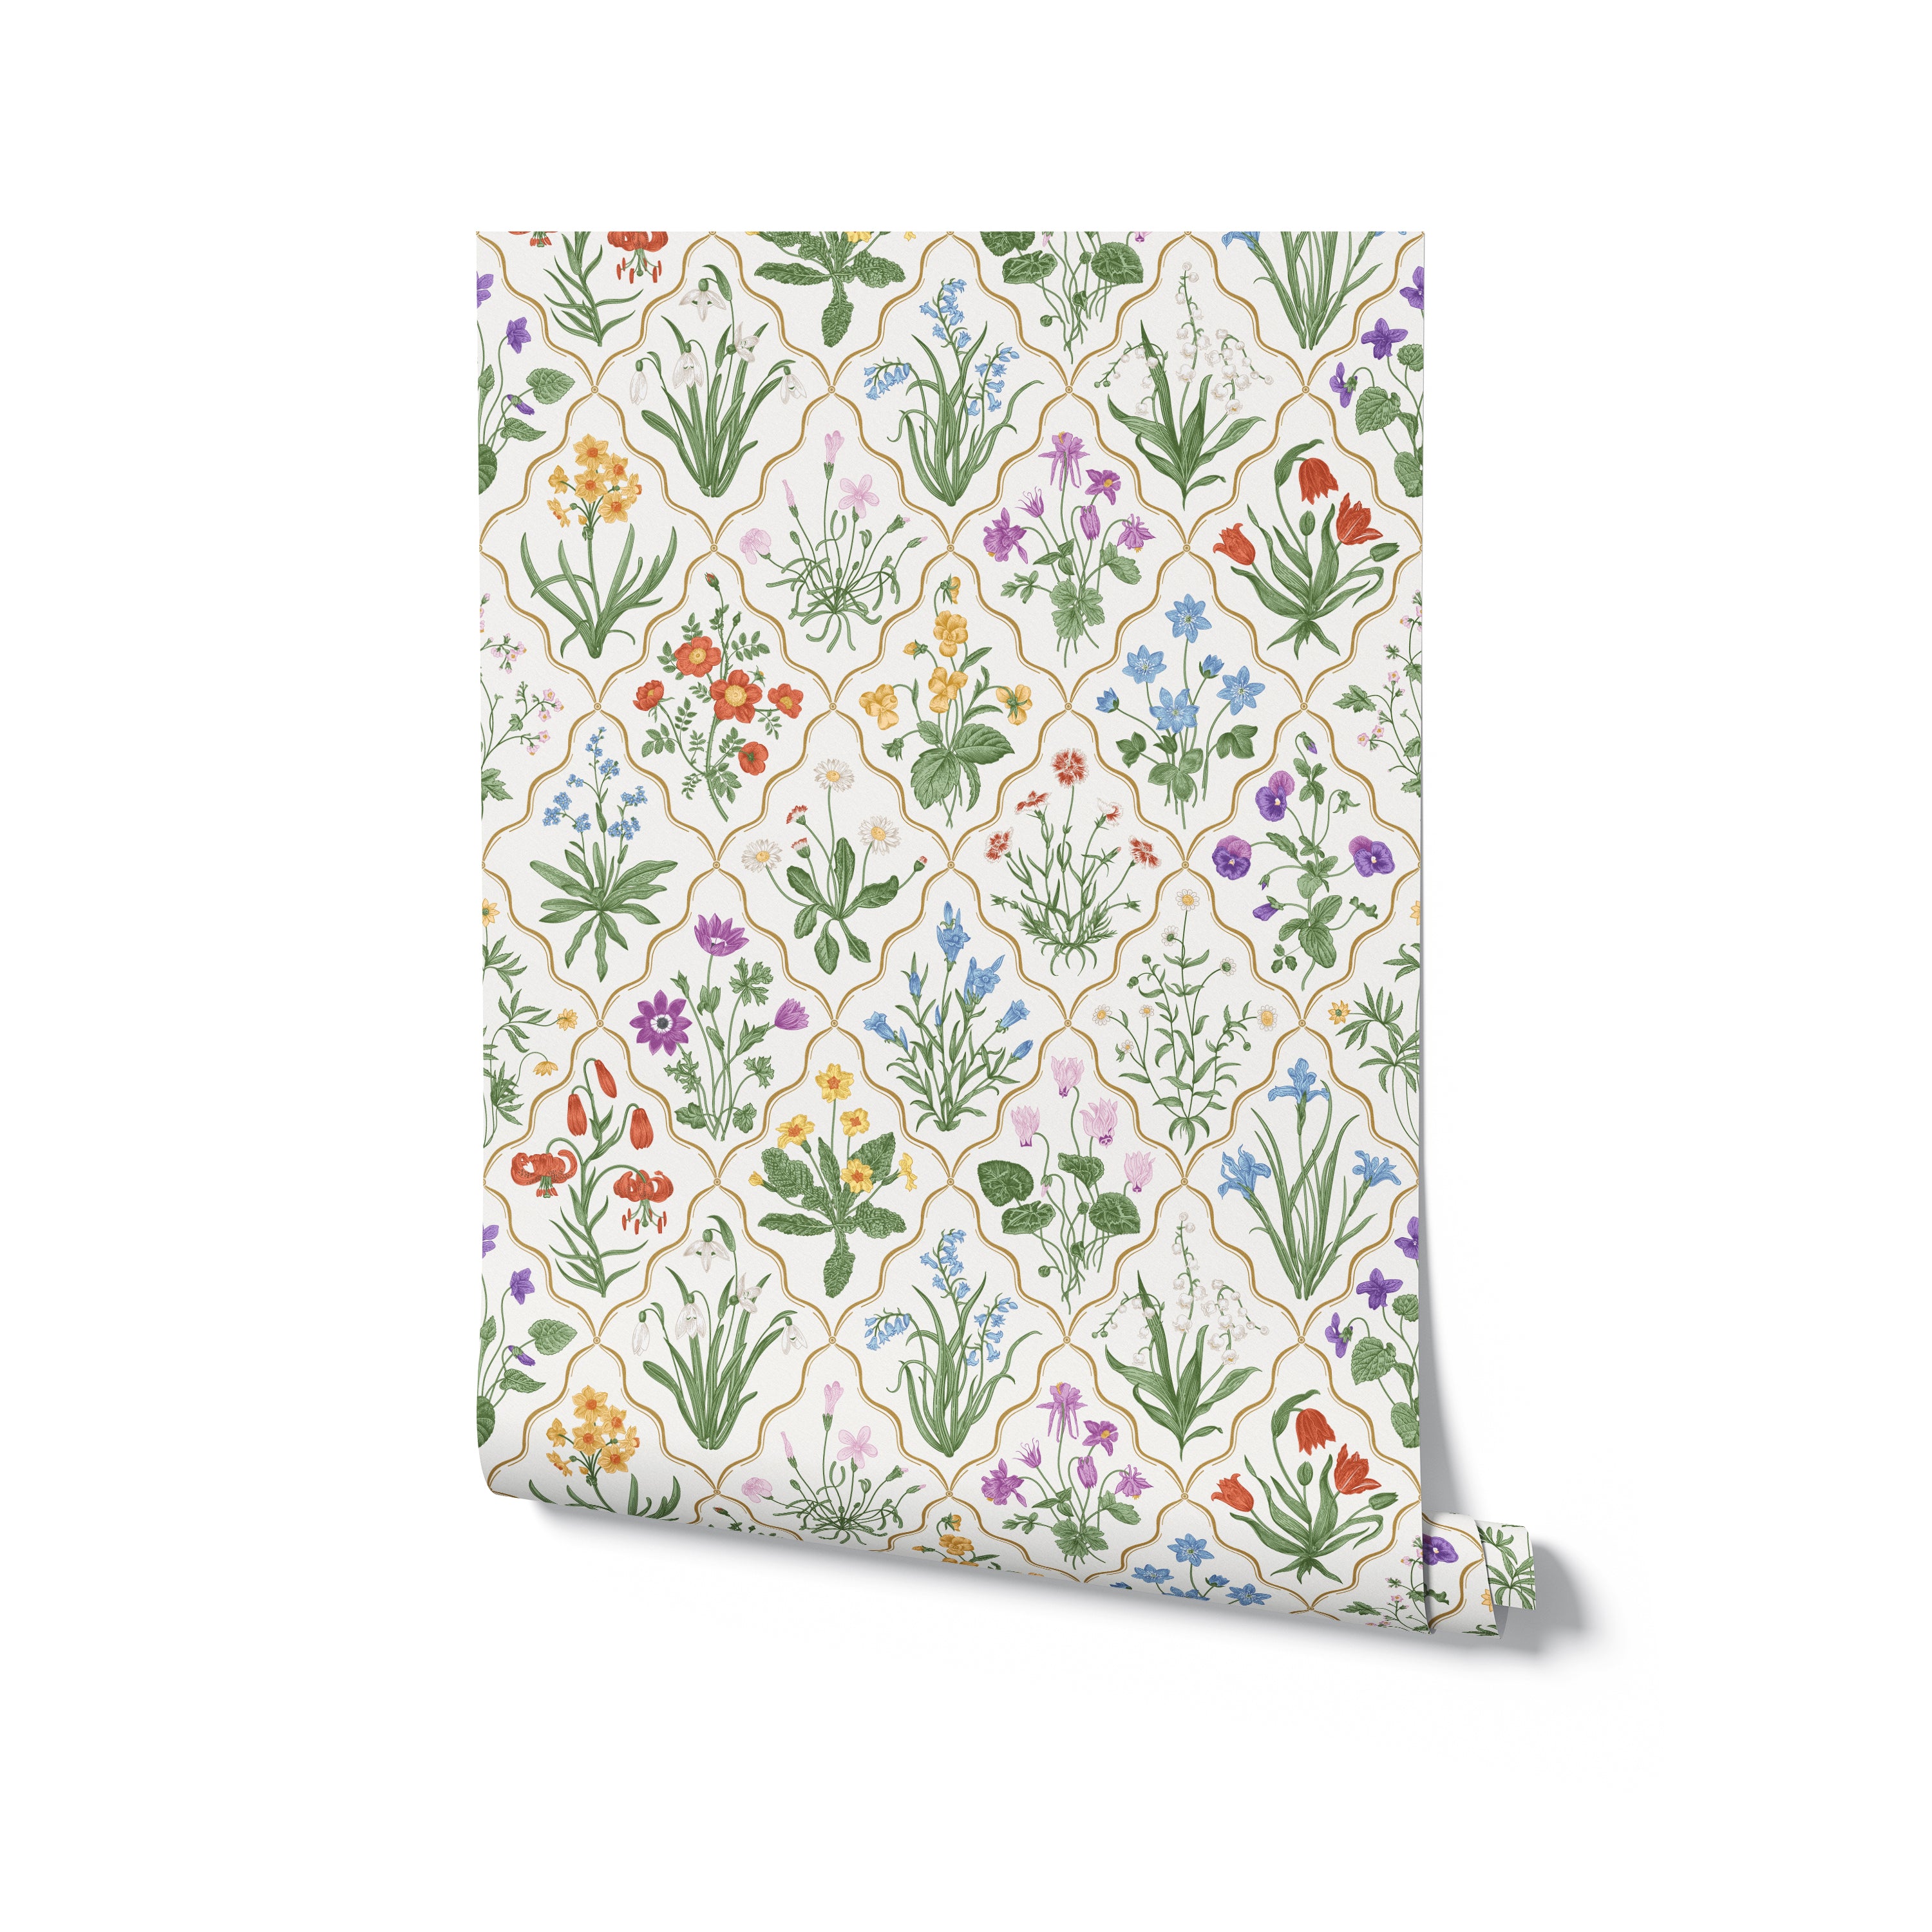 Rolled-up view of a floral wallpaper with a complex garden-inspired design, highlighting various flowers and plants such as roses, violets, and snowdrops, intricately detailed and colored to reflect natural beauty, rolled up to show potential for home decoration.